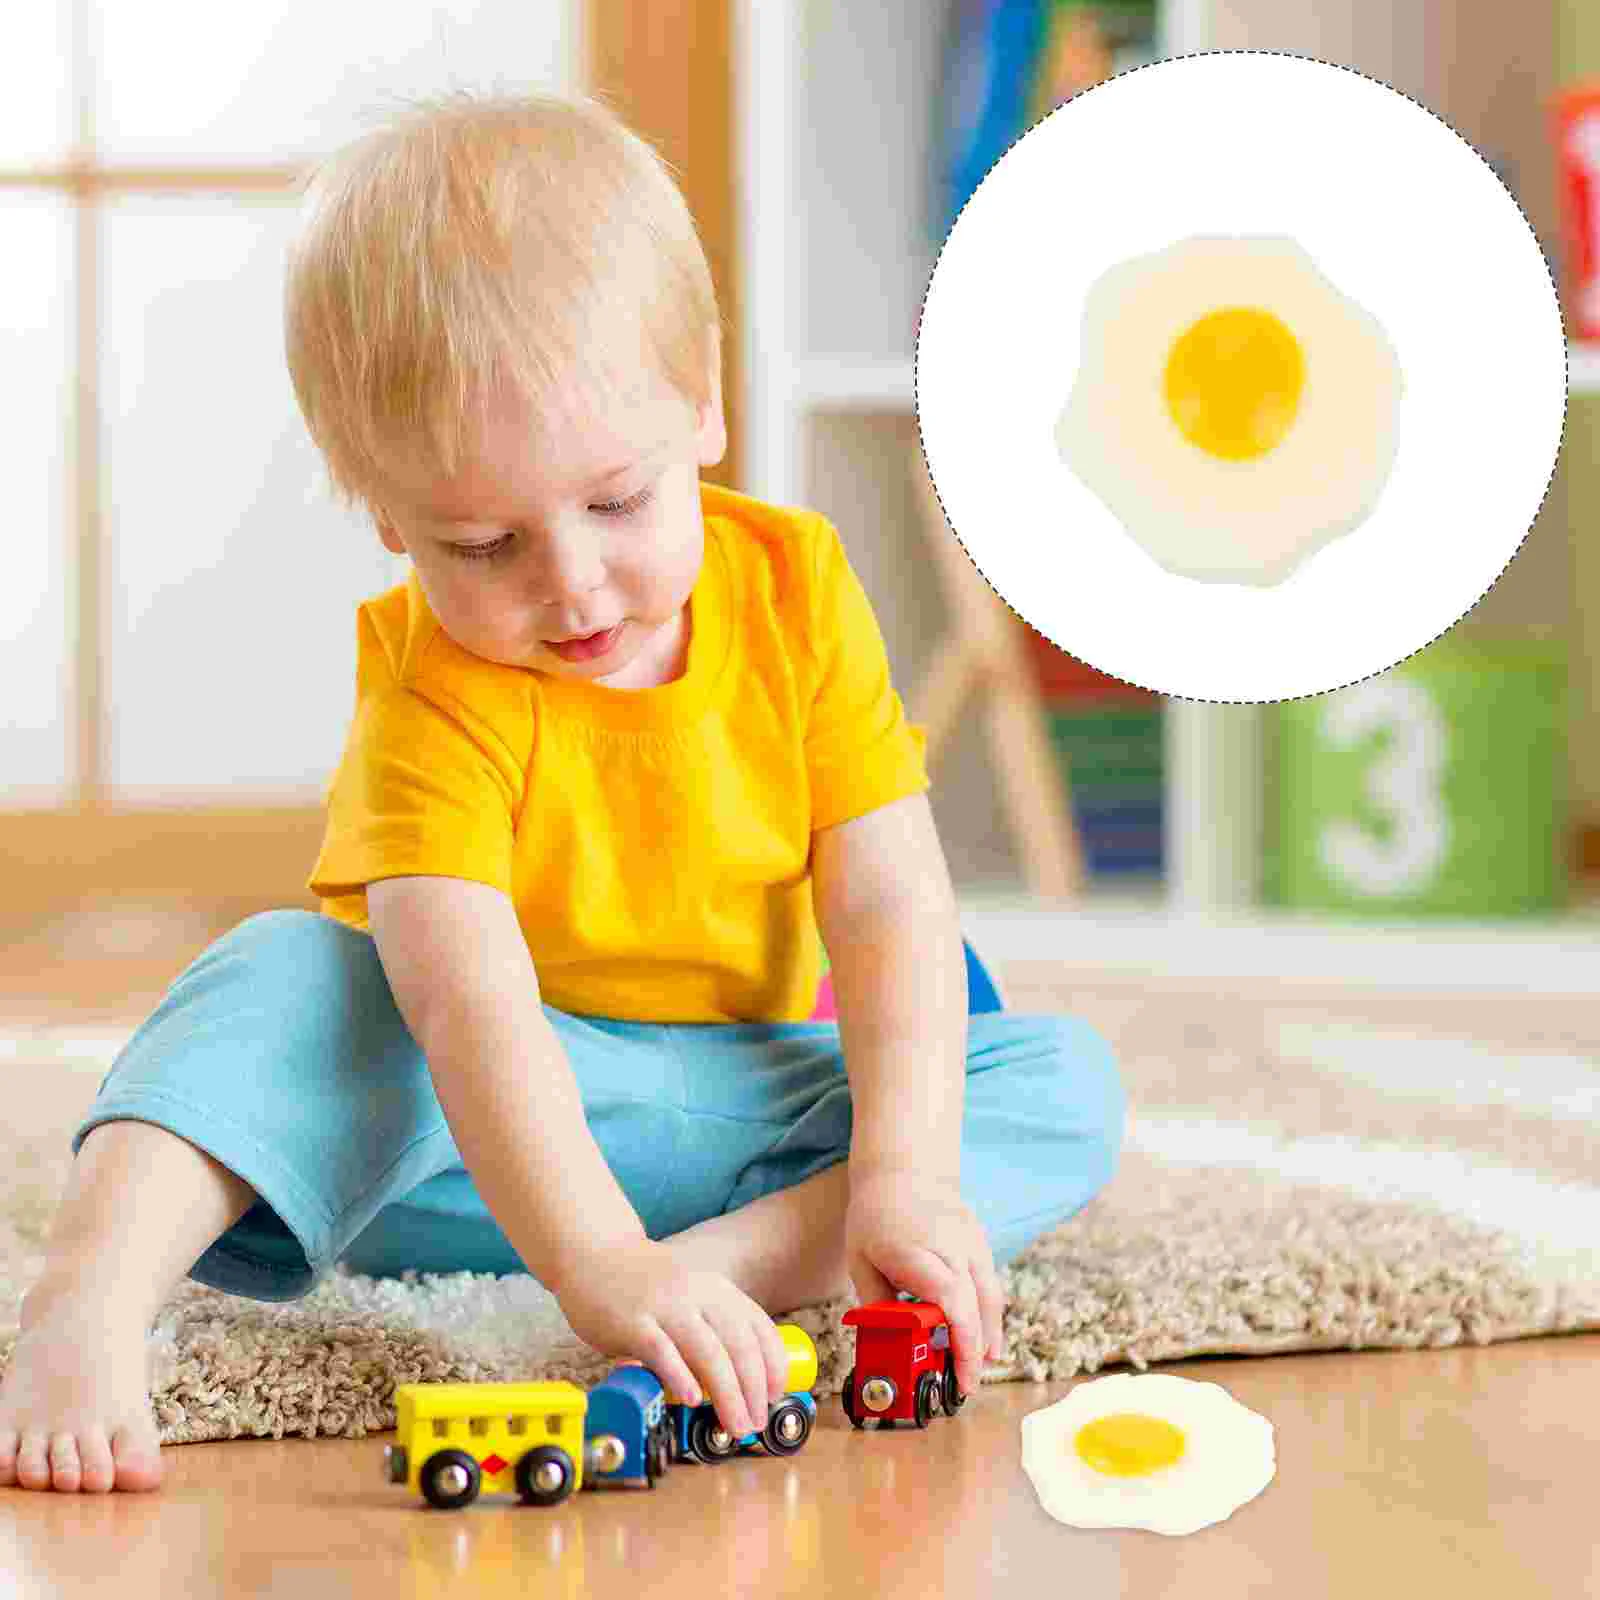 

Toys Egg Fake Eggs Fried Toy Sensory Squeeze Stress Artificial Realistic Chicken Anti Simulation Hand Fidget Tricky Cartoon